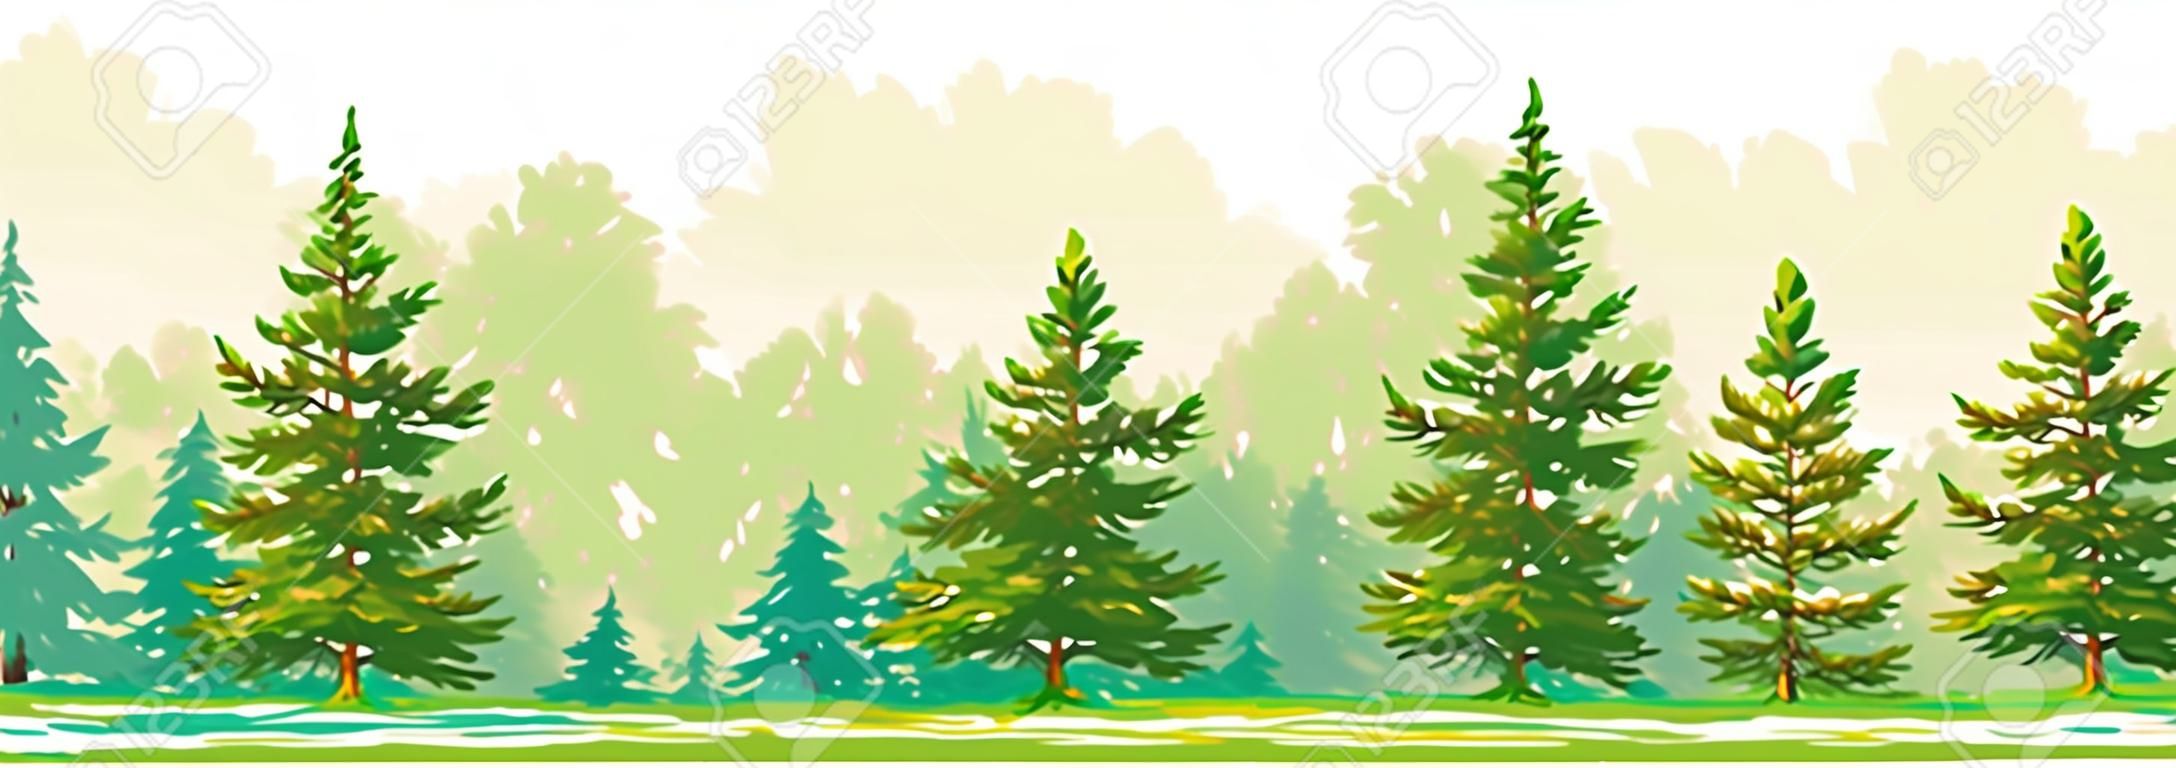 Border of a forest with young fir and pine trees. Vector graphic. EPS8